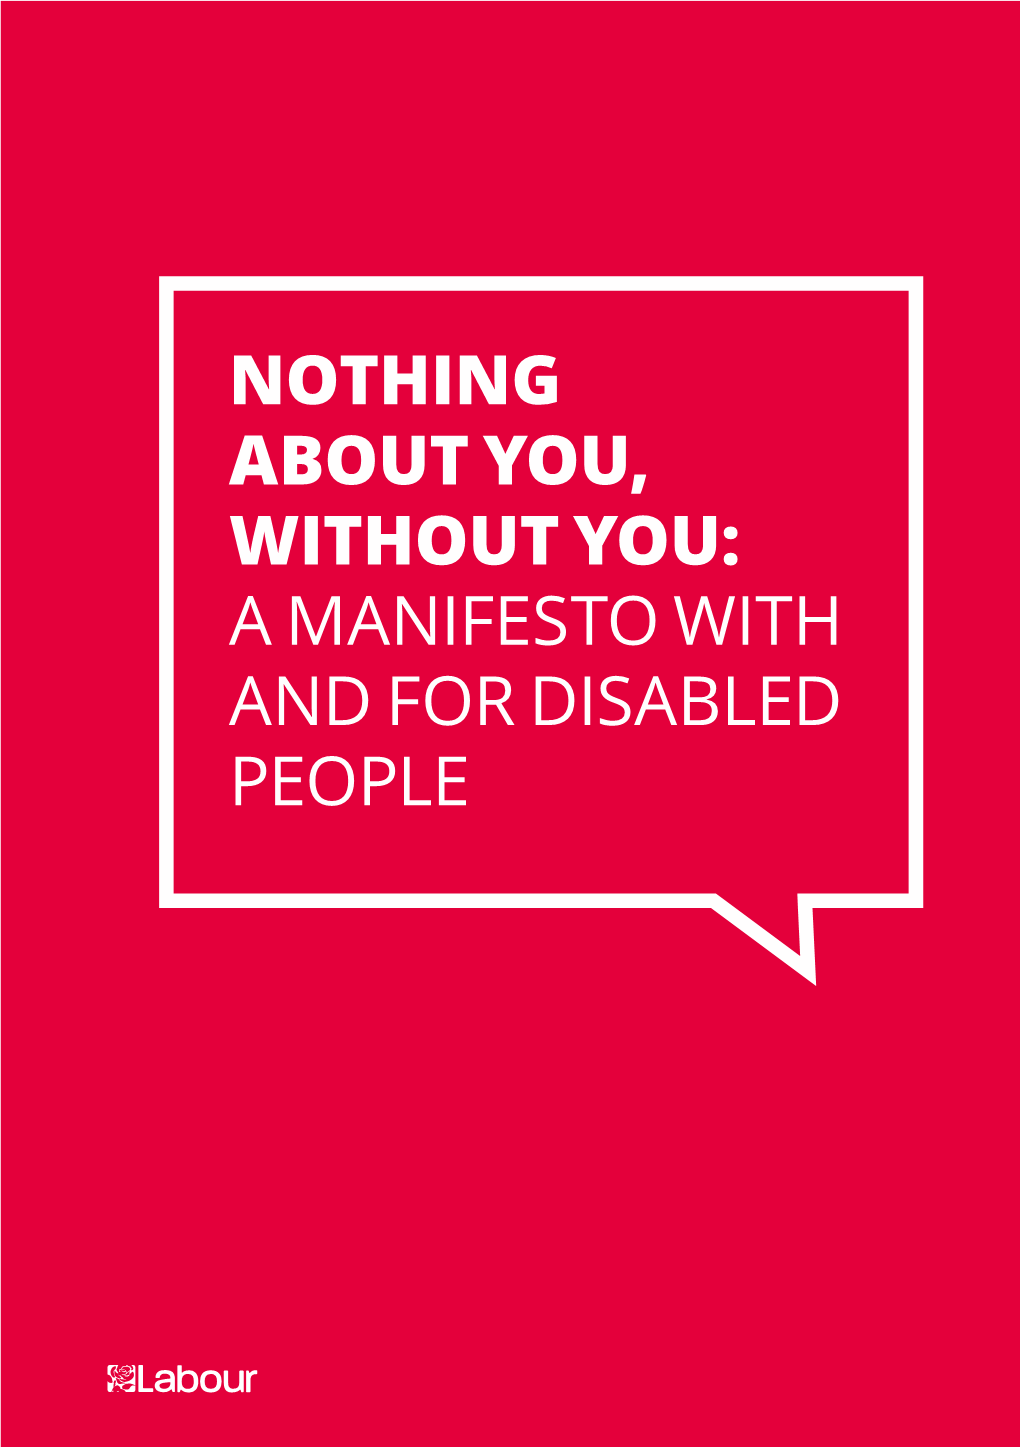 A Manifesto with and for Disabled People